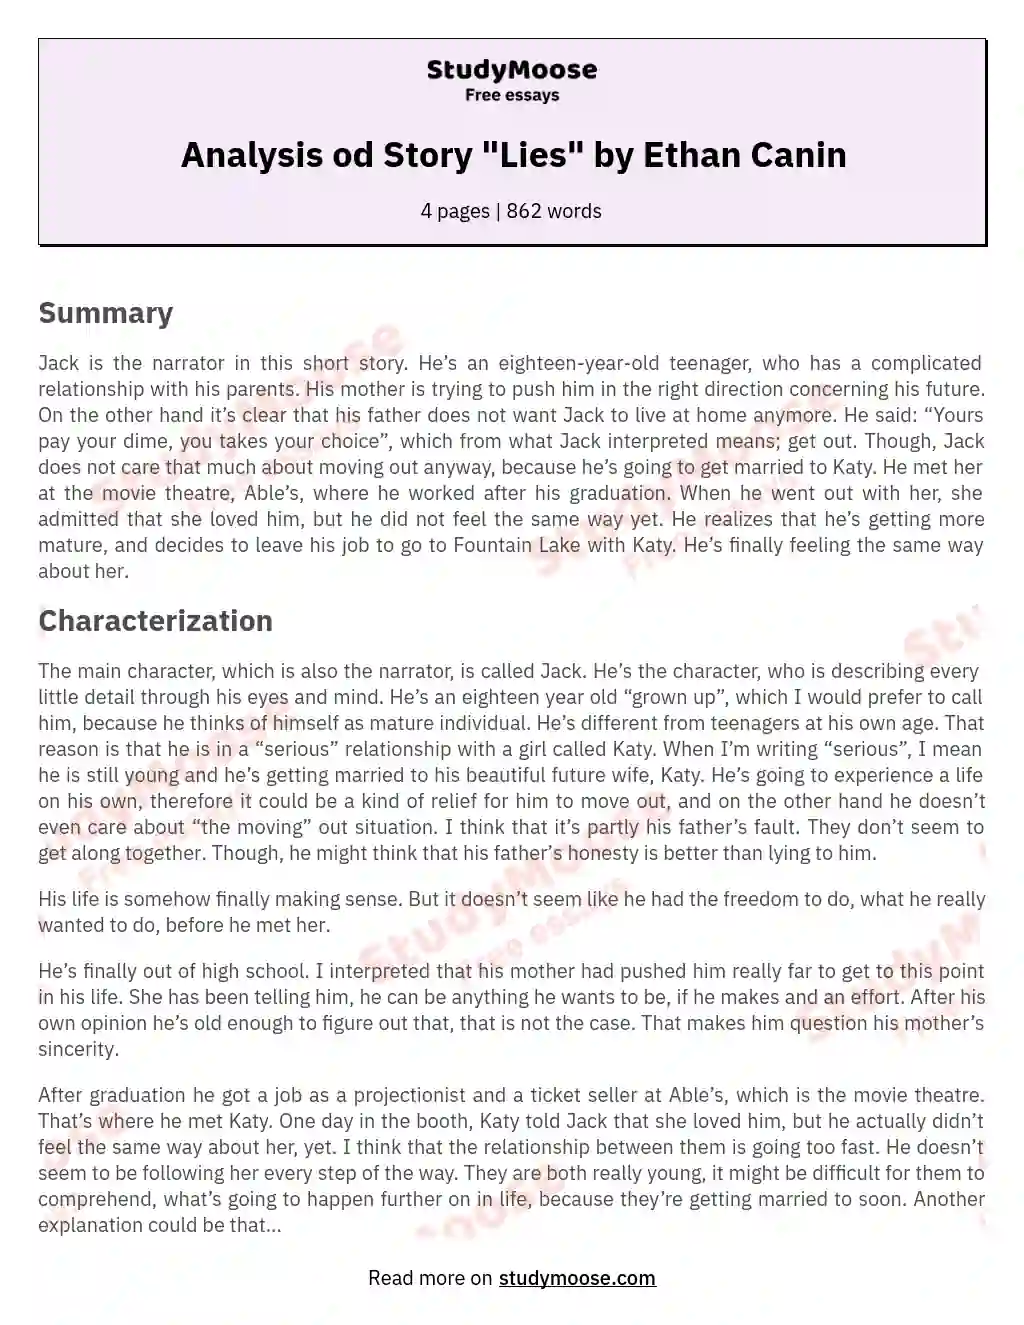 Analysis od Story "Lies" by Ethan Canin essay